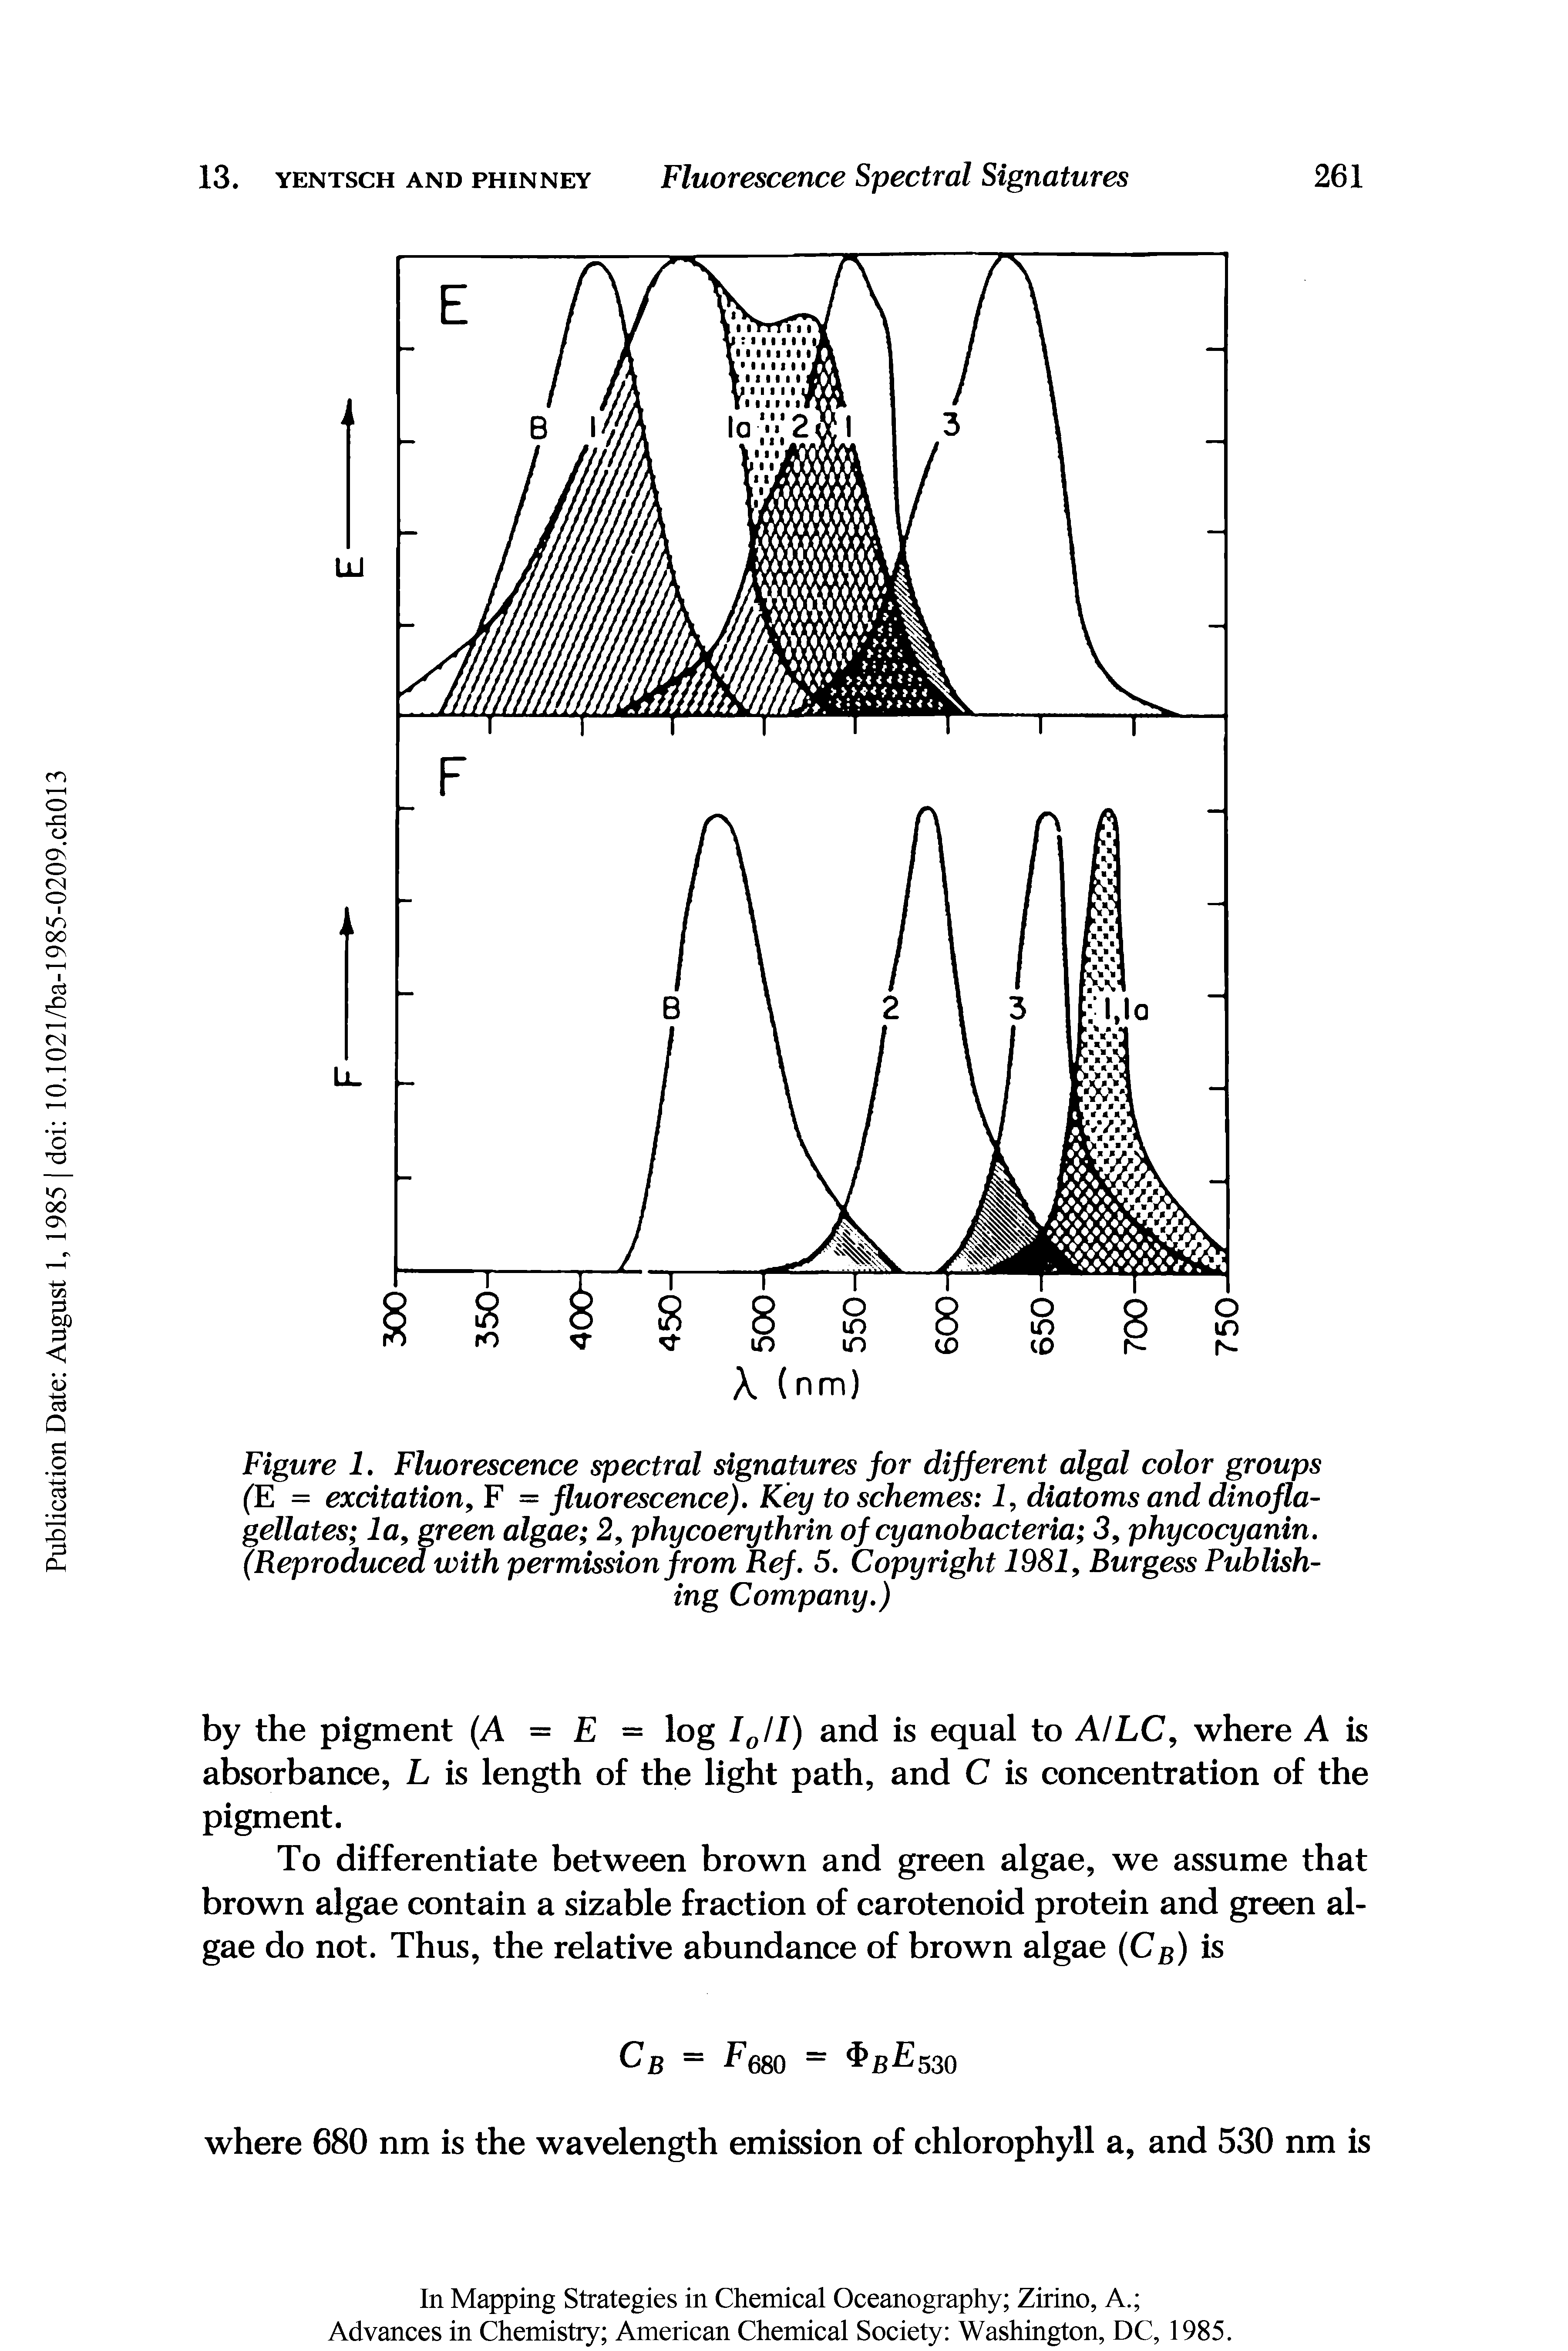 Figure 1. Fluorescence spectral signatures for different algal color groups (E = excitation F = fluorescence). Key to schemes 1, diatoms and dinofla-gellates la green algae 2, phycoerythrin of cyanobacteria 3, phycocyanin. (Reproduced with permission from Ref. 5. Copyright 1981 Burgess Publishing Company.)...